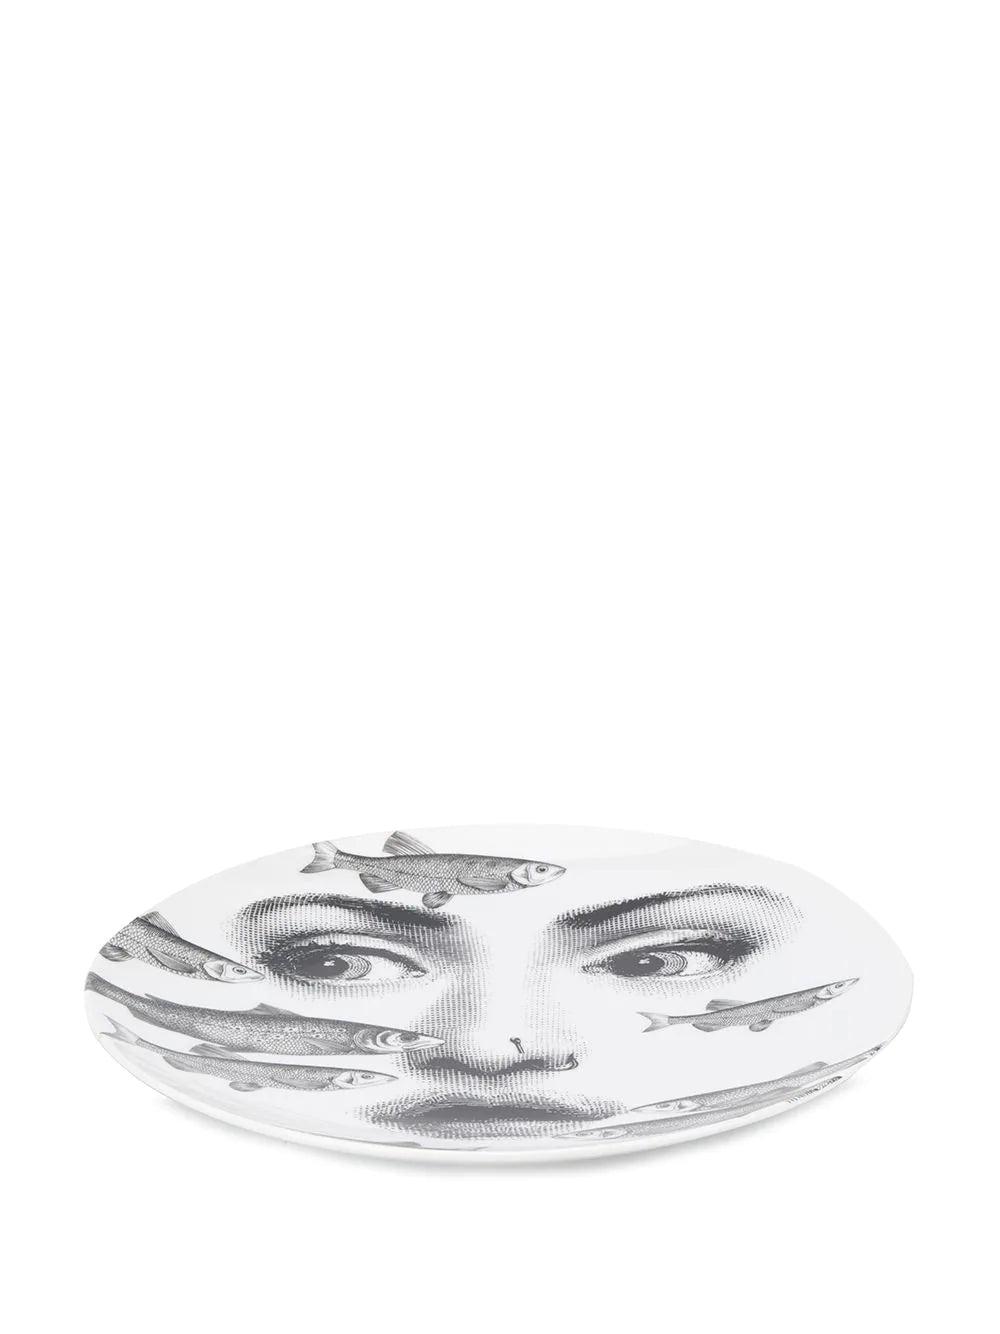 Shop Fornasetti Illustrated Plate